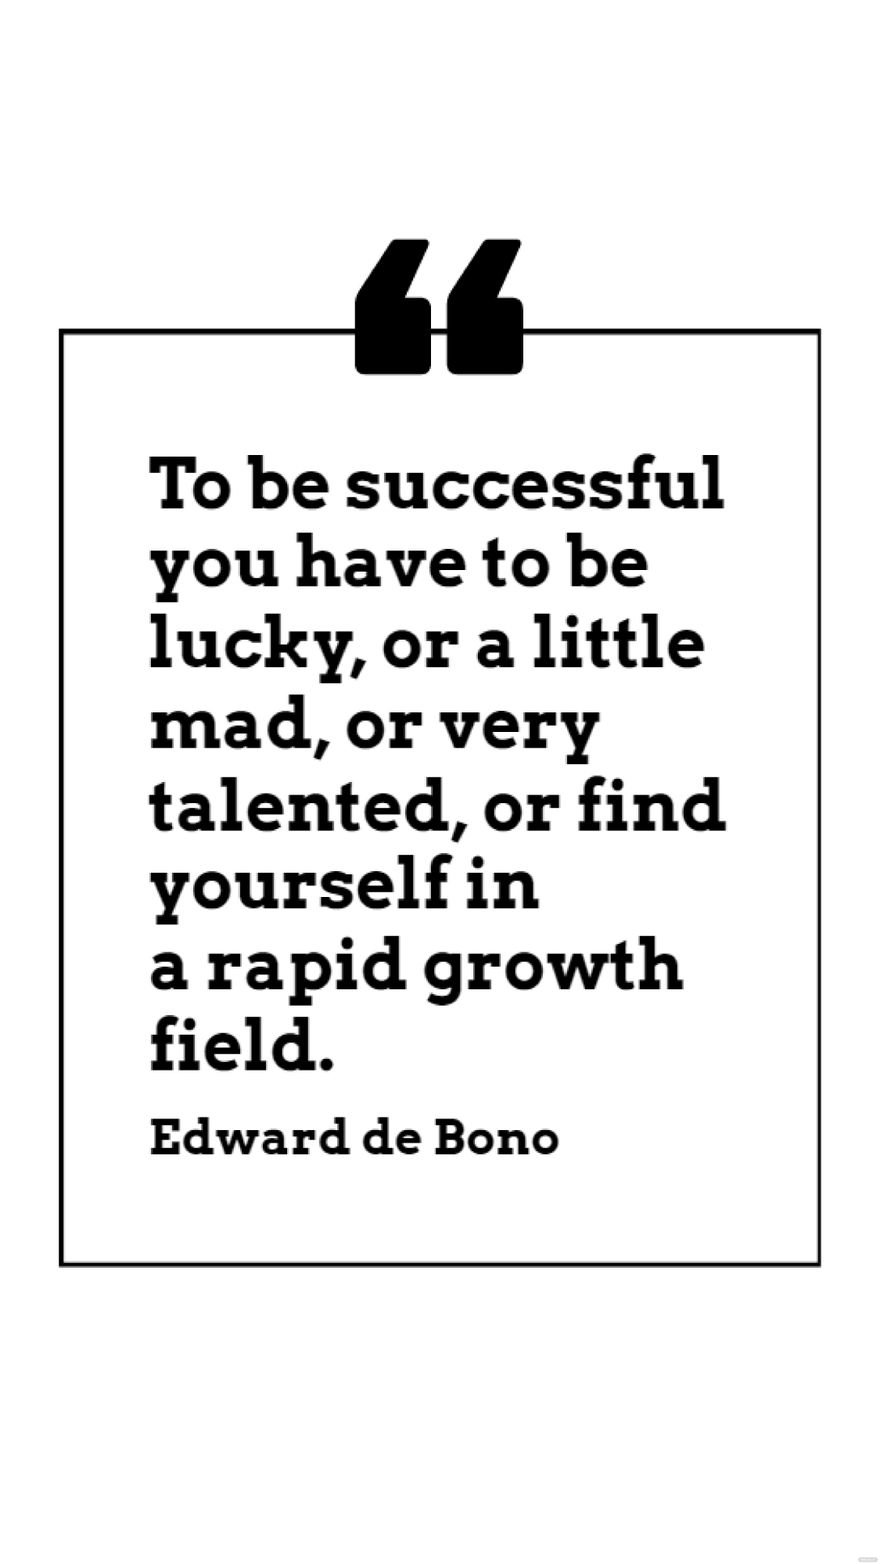 Free Edward de Bono - To be successful you have to be lucky, or a little mad, or very talented, or find yourself in a rapid growth field. in JPG